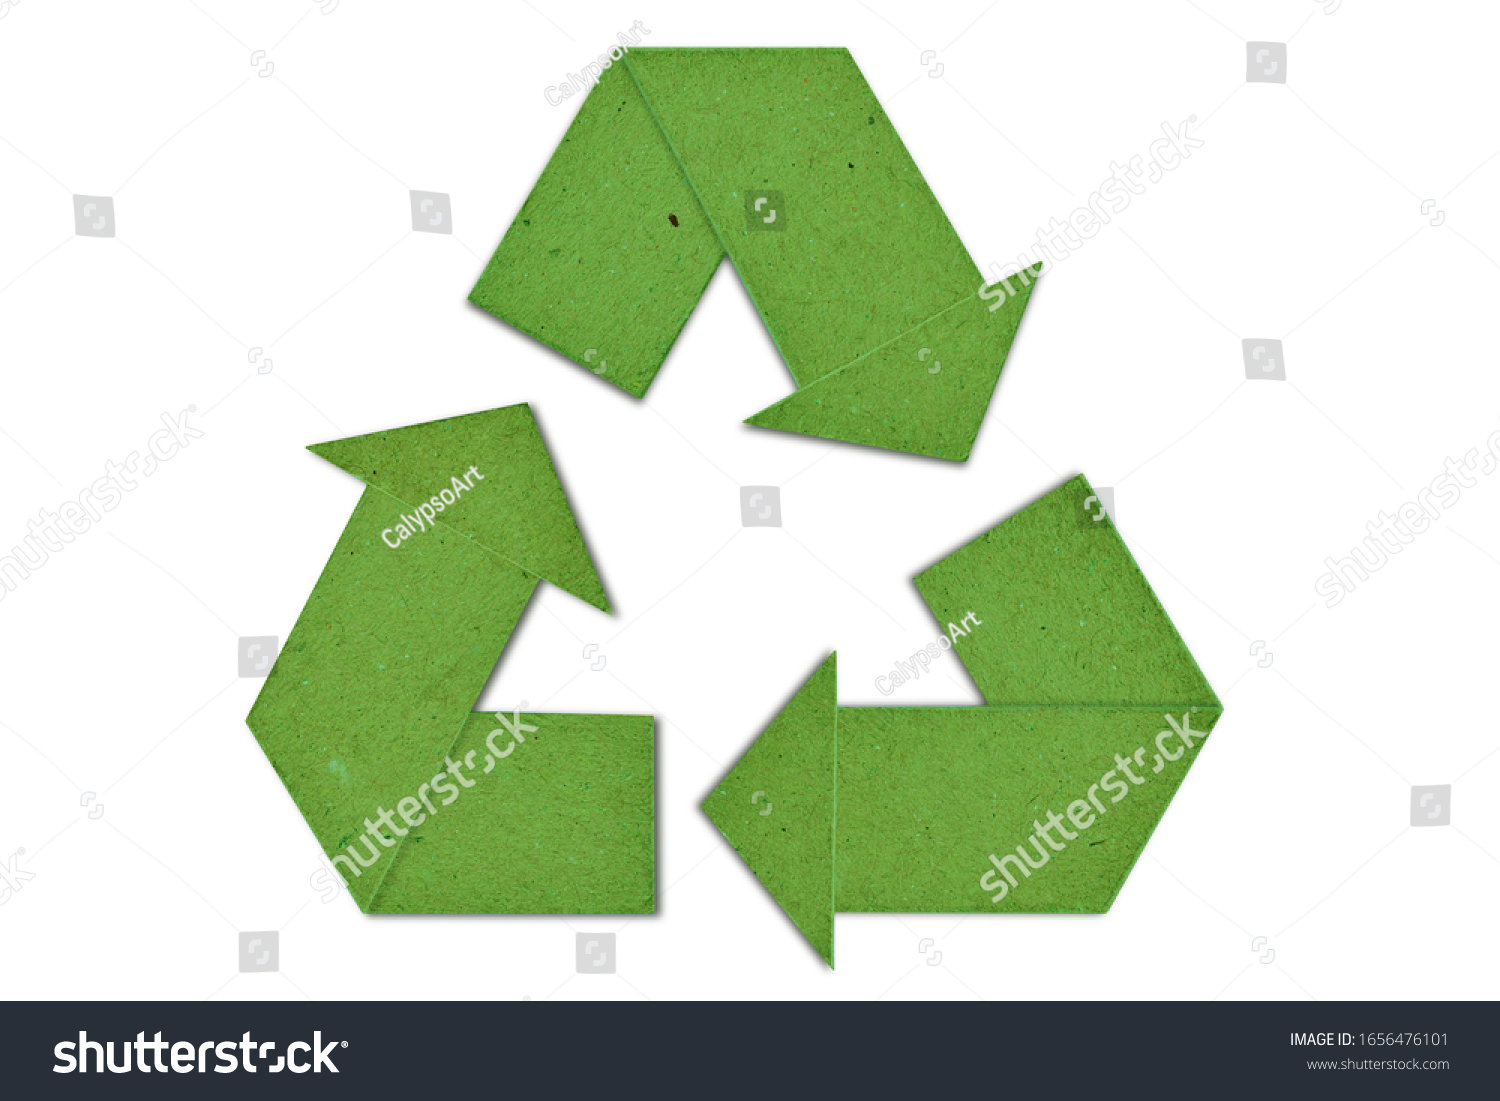 Green cardboard recycling symbol - Concept of ecology and paper recycling  #1656476101